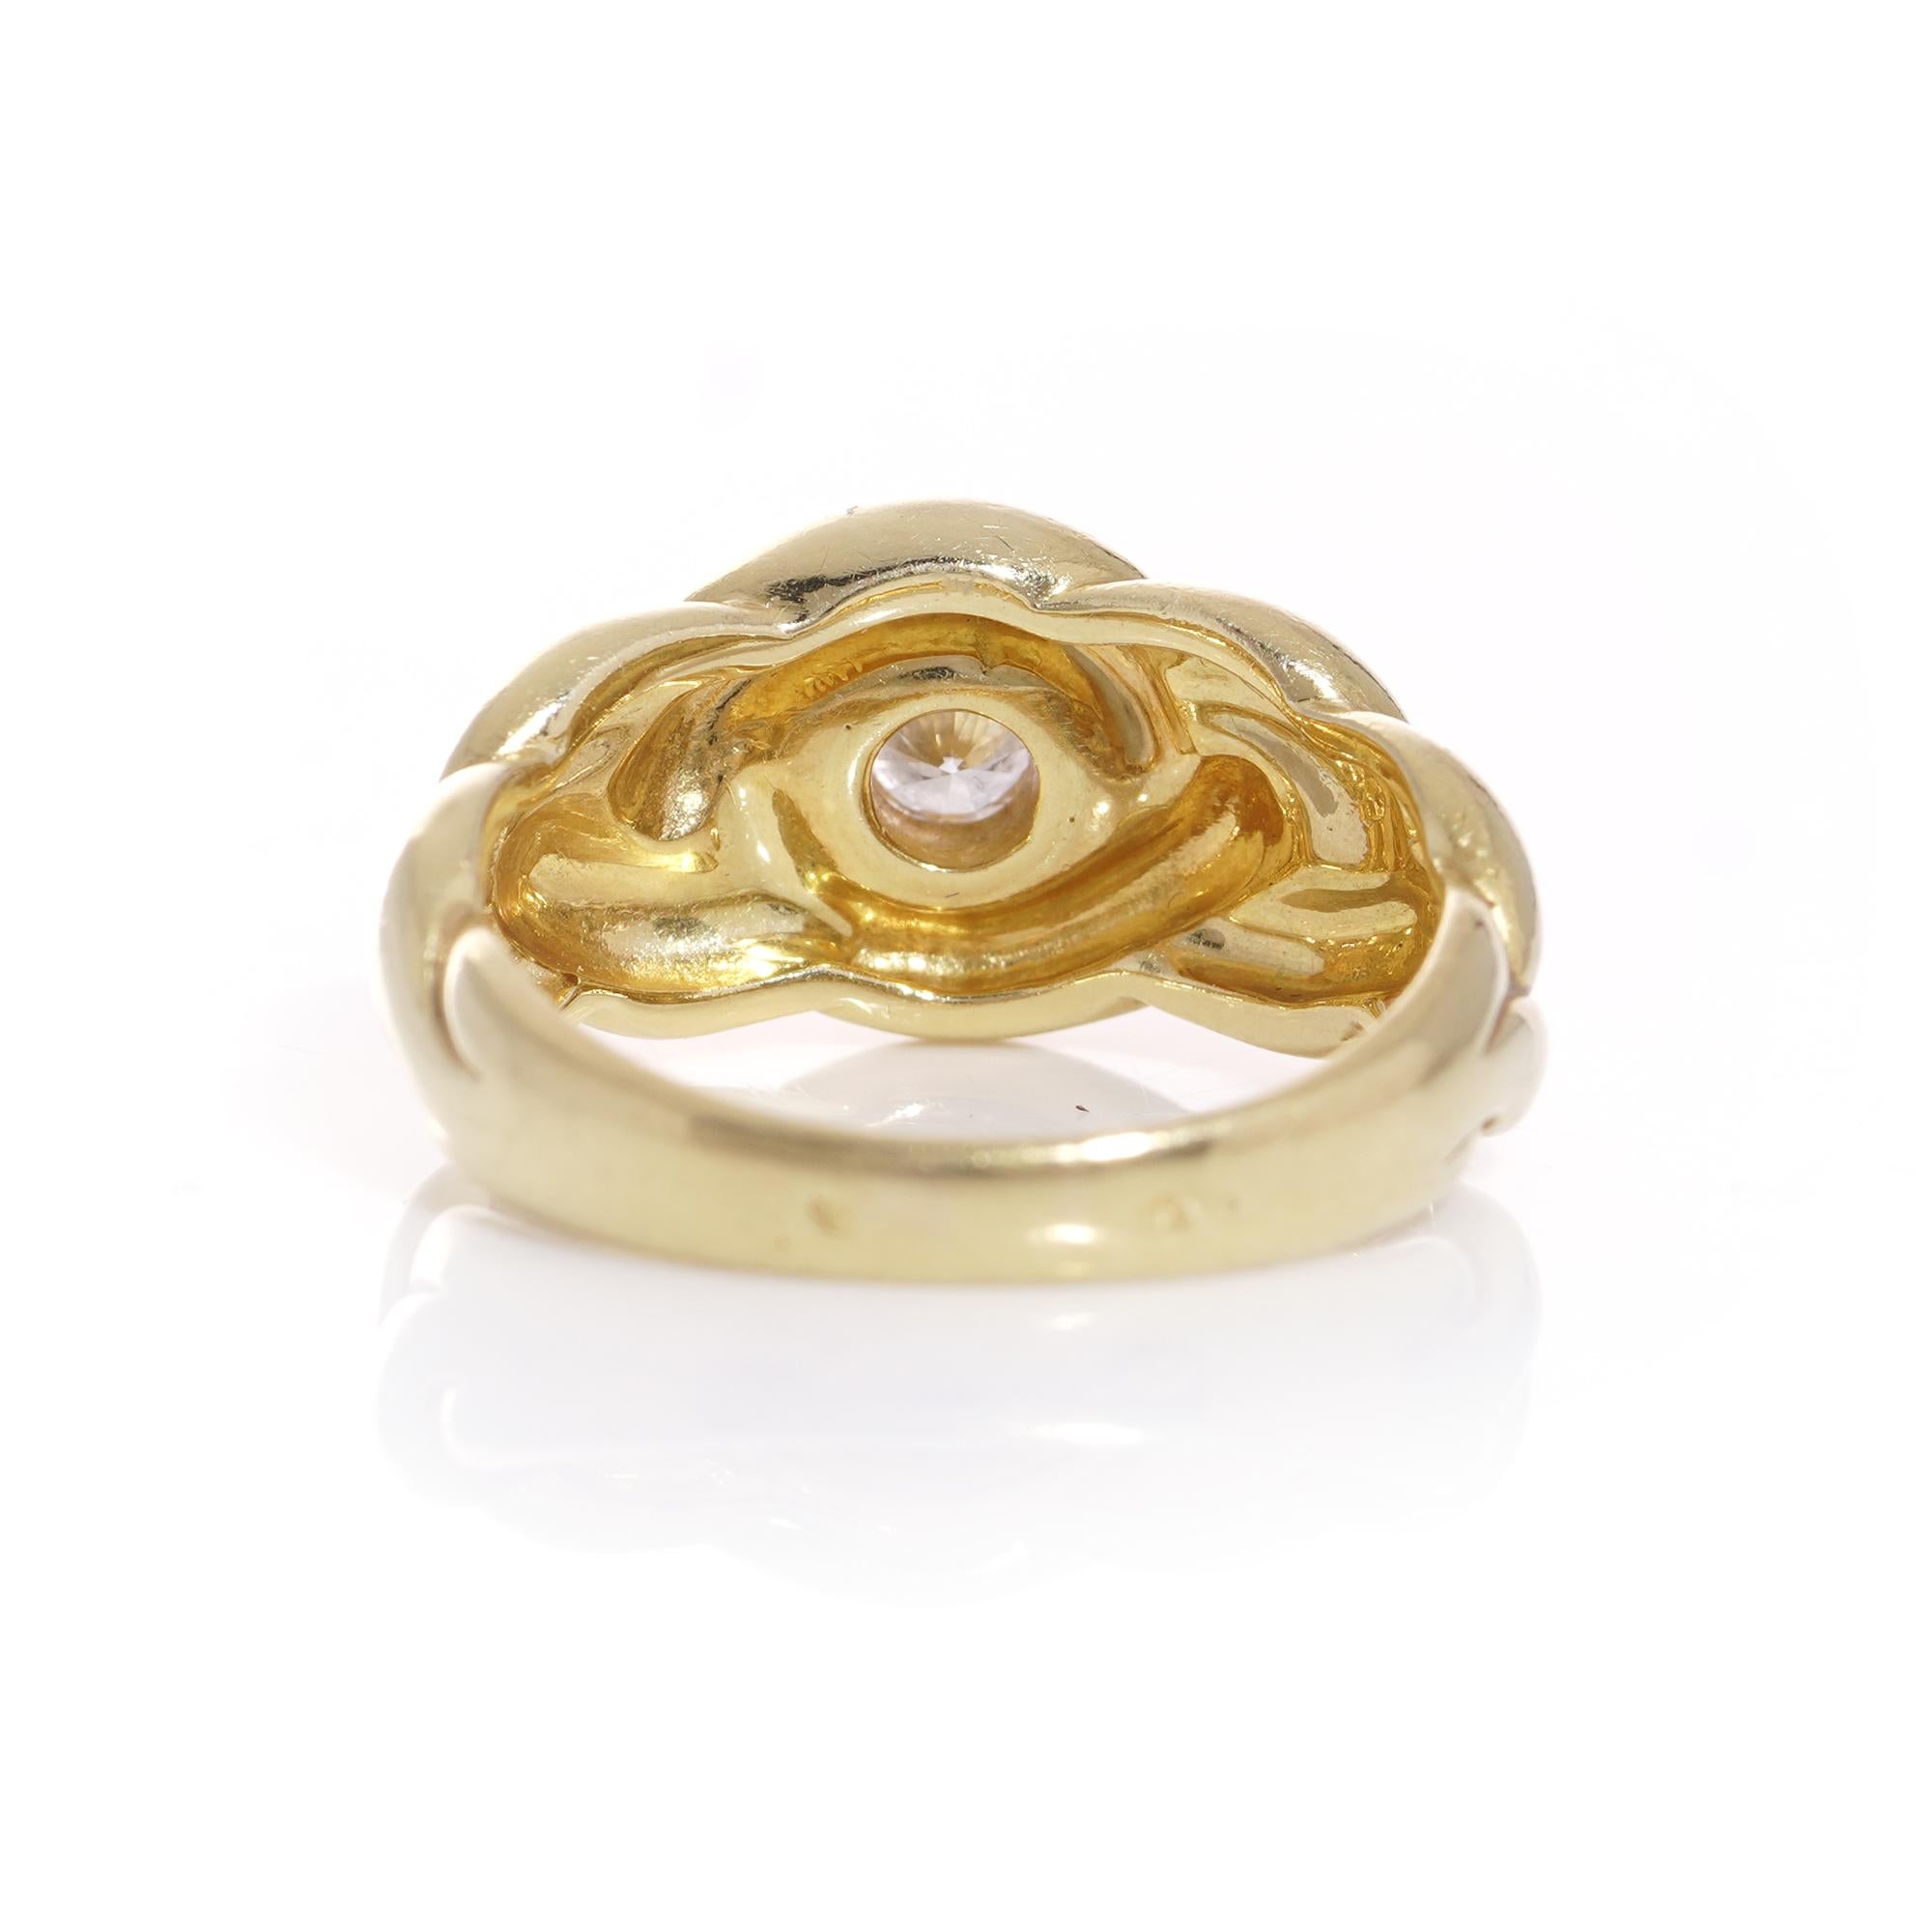 Van Cleef & Arpels 18kt. yellow gold braid design ring In Good Condition For Sale In Braintree, GB